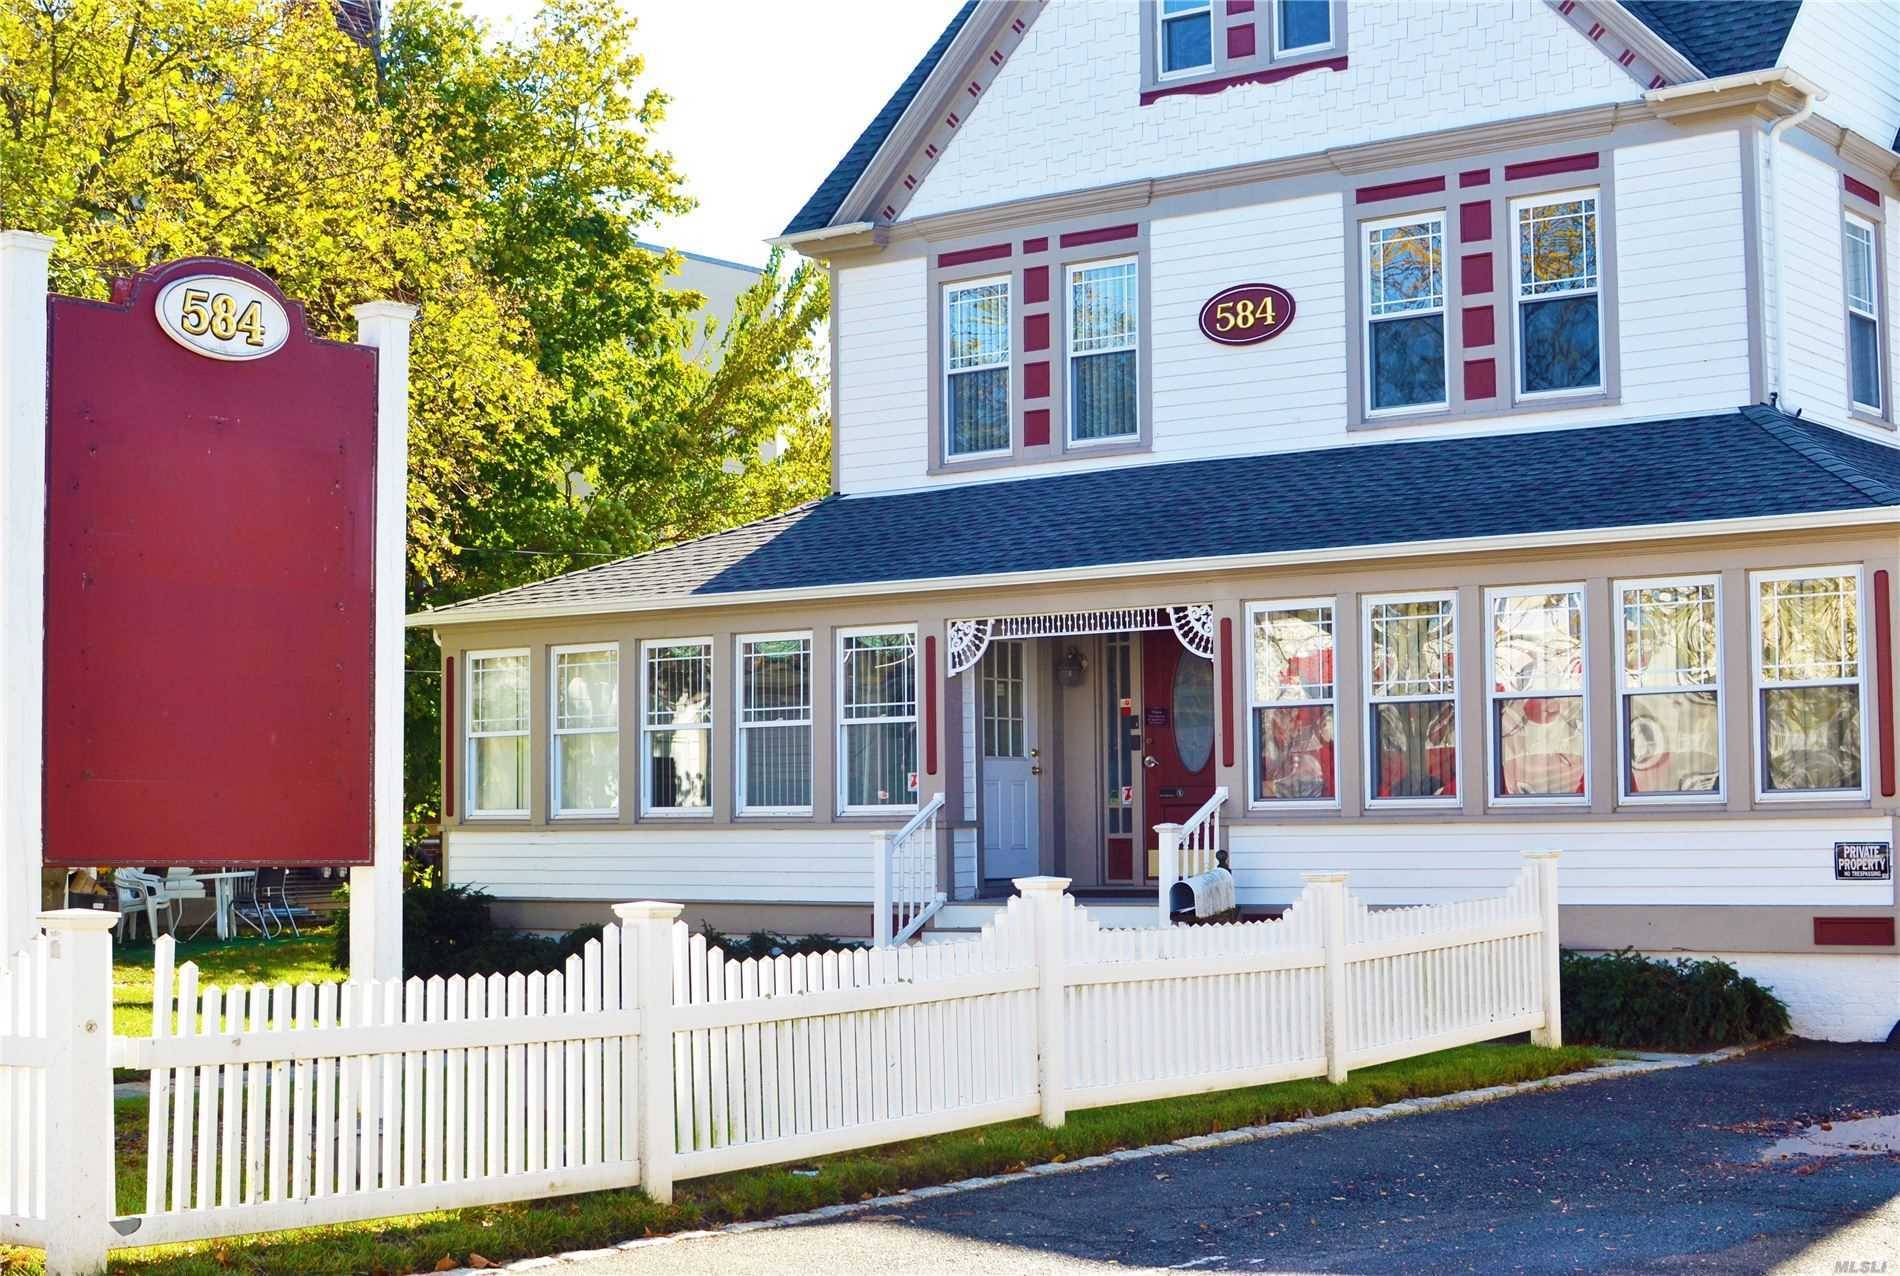 Beautiful and charming 3 story Victorian Building for rent on Main St in the heart of Islip.